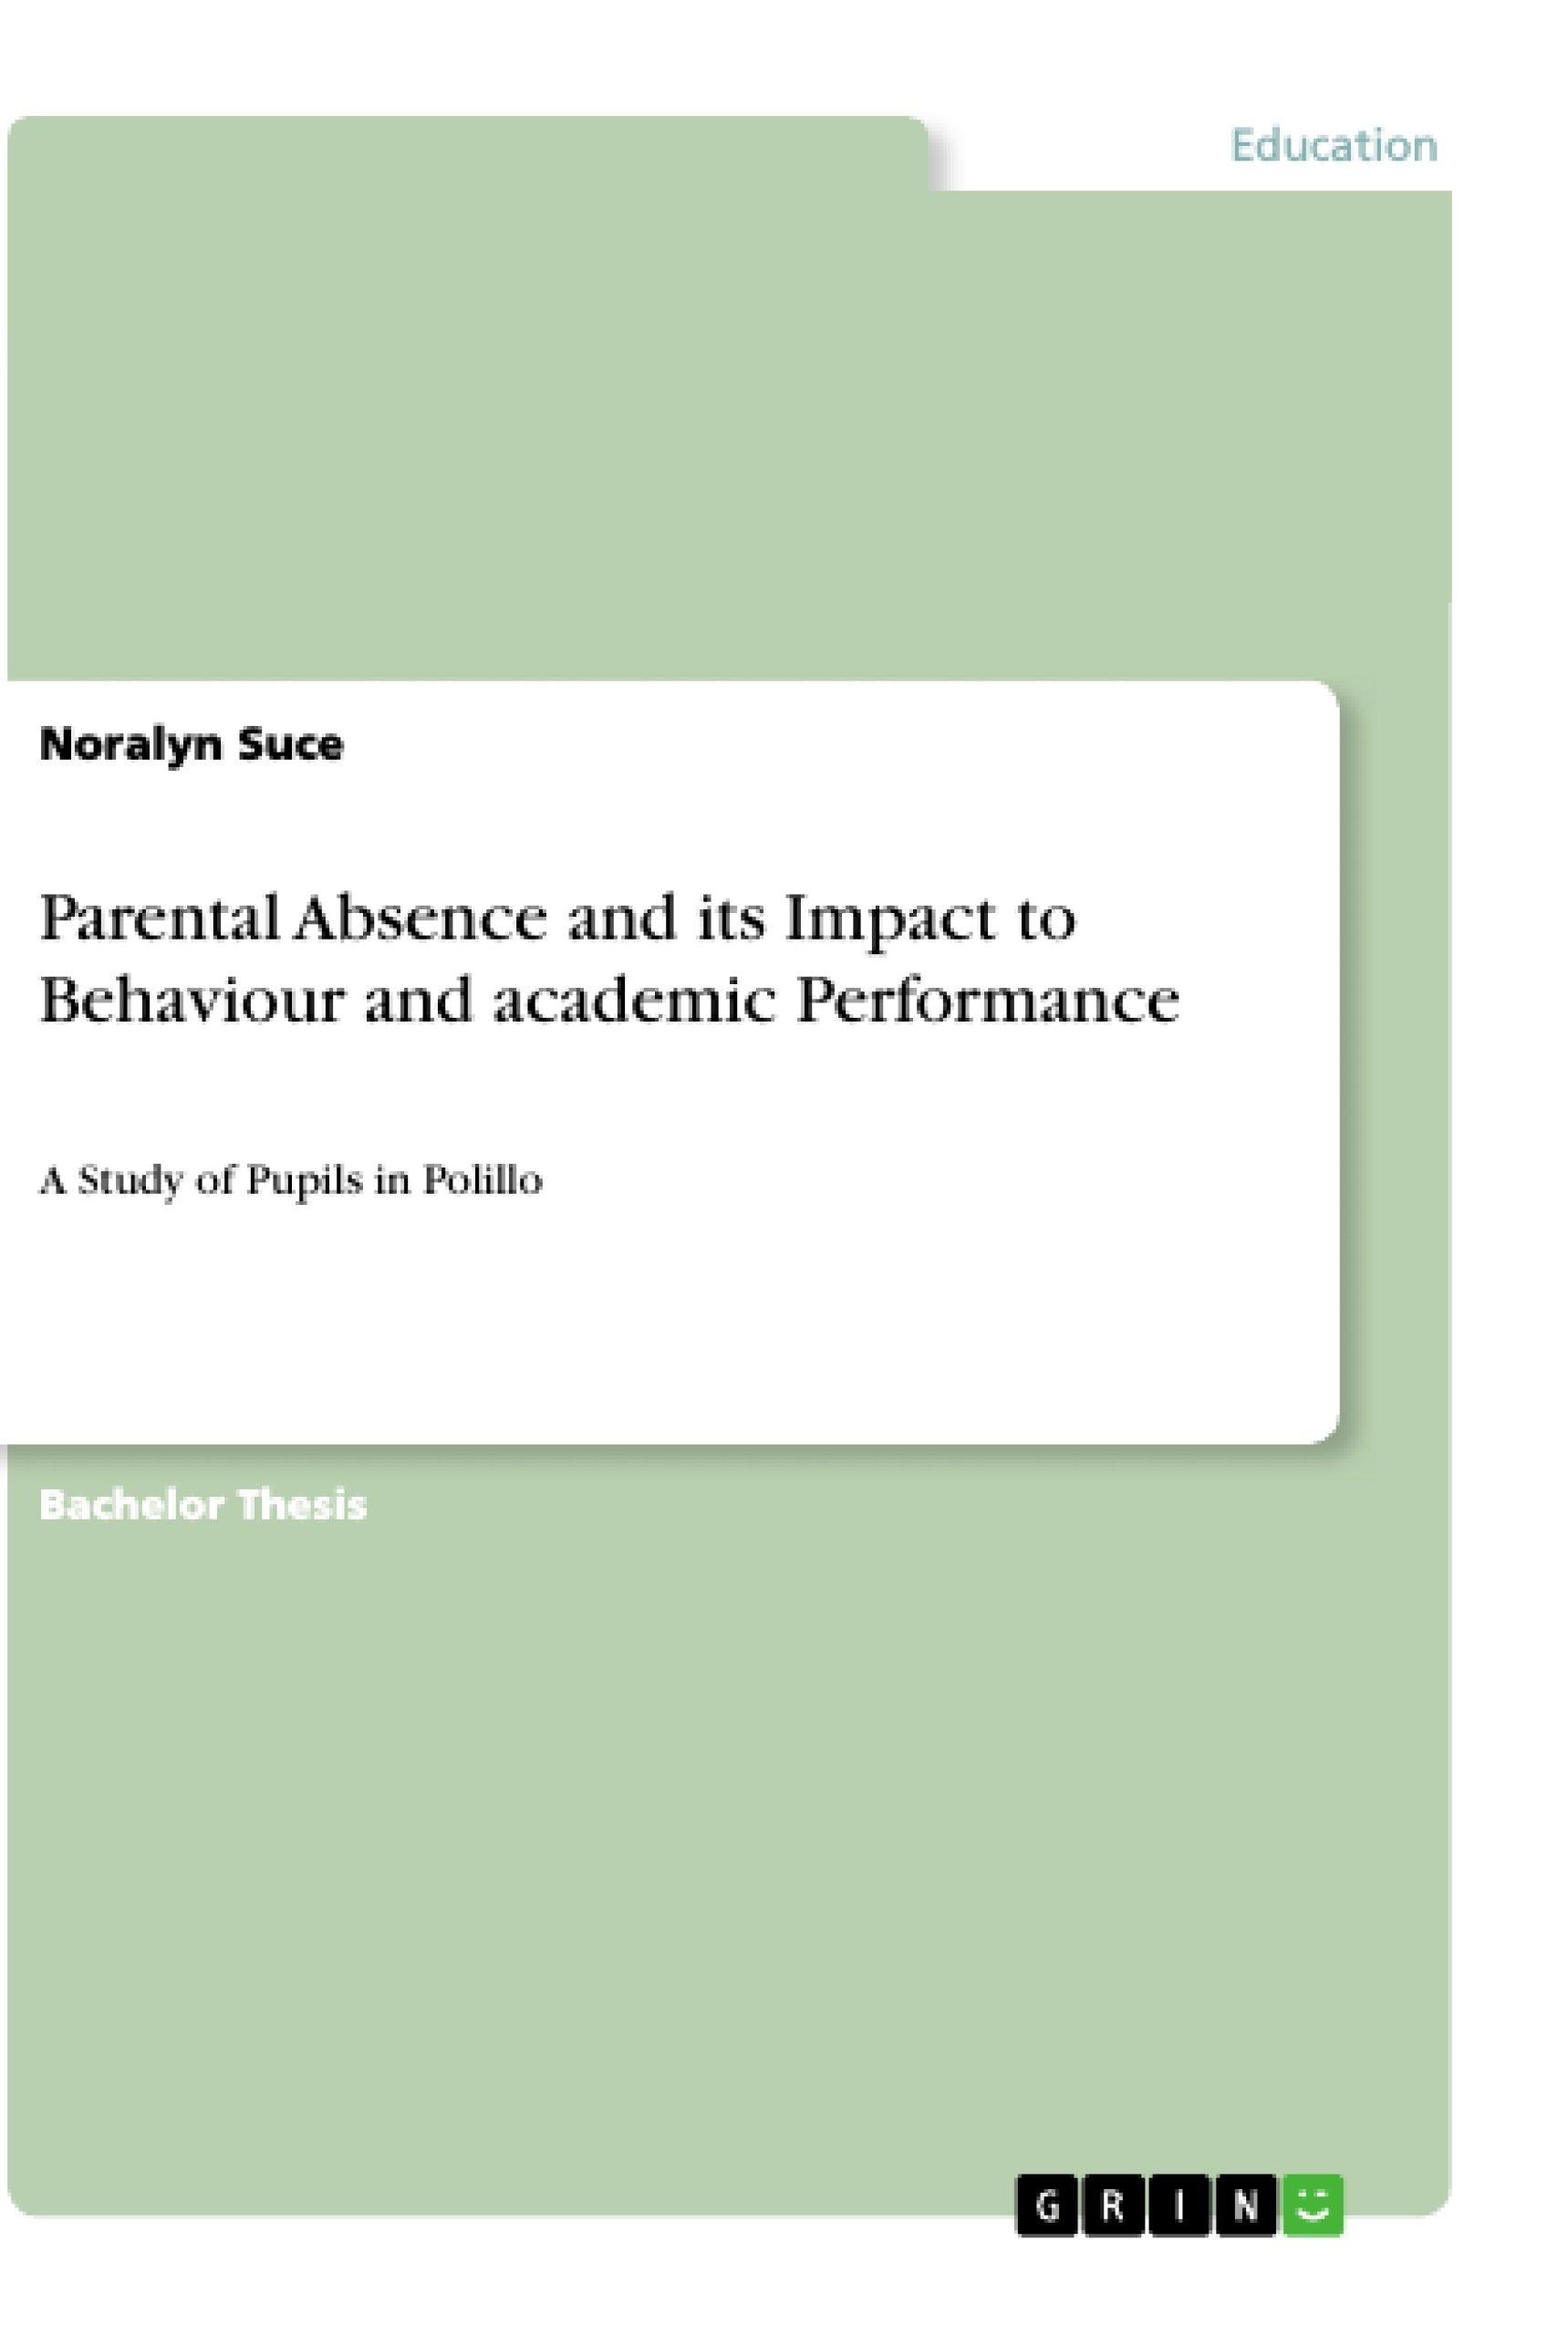 Title: Parental Absence and its Impact to Behaviour and academic Performance